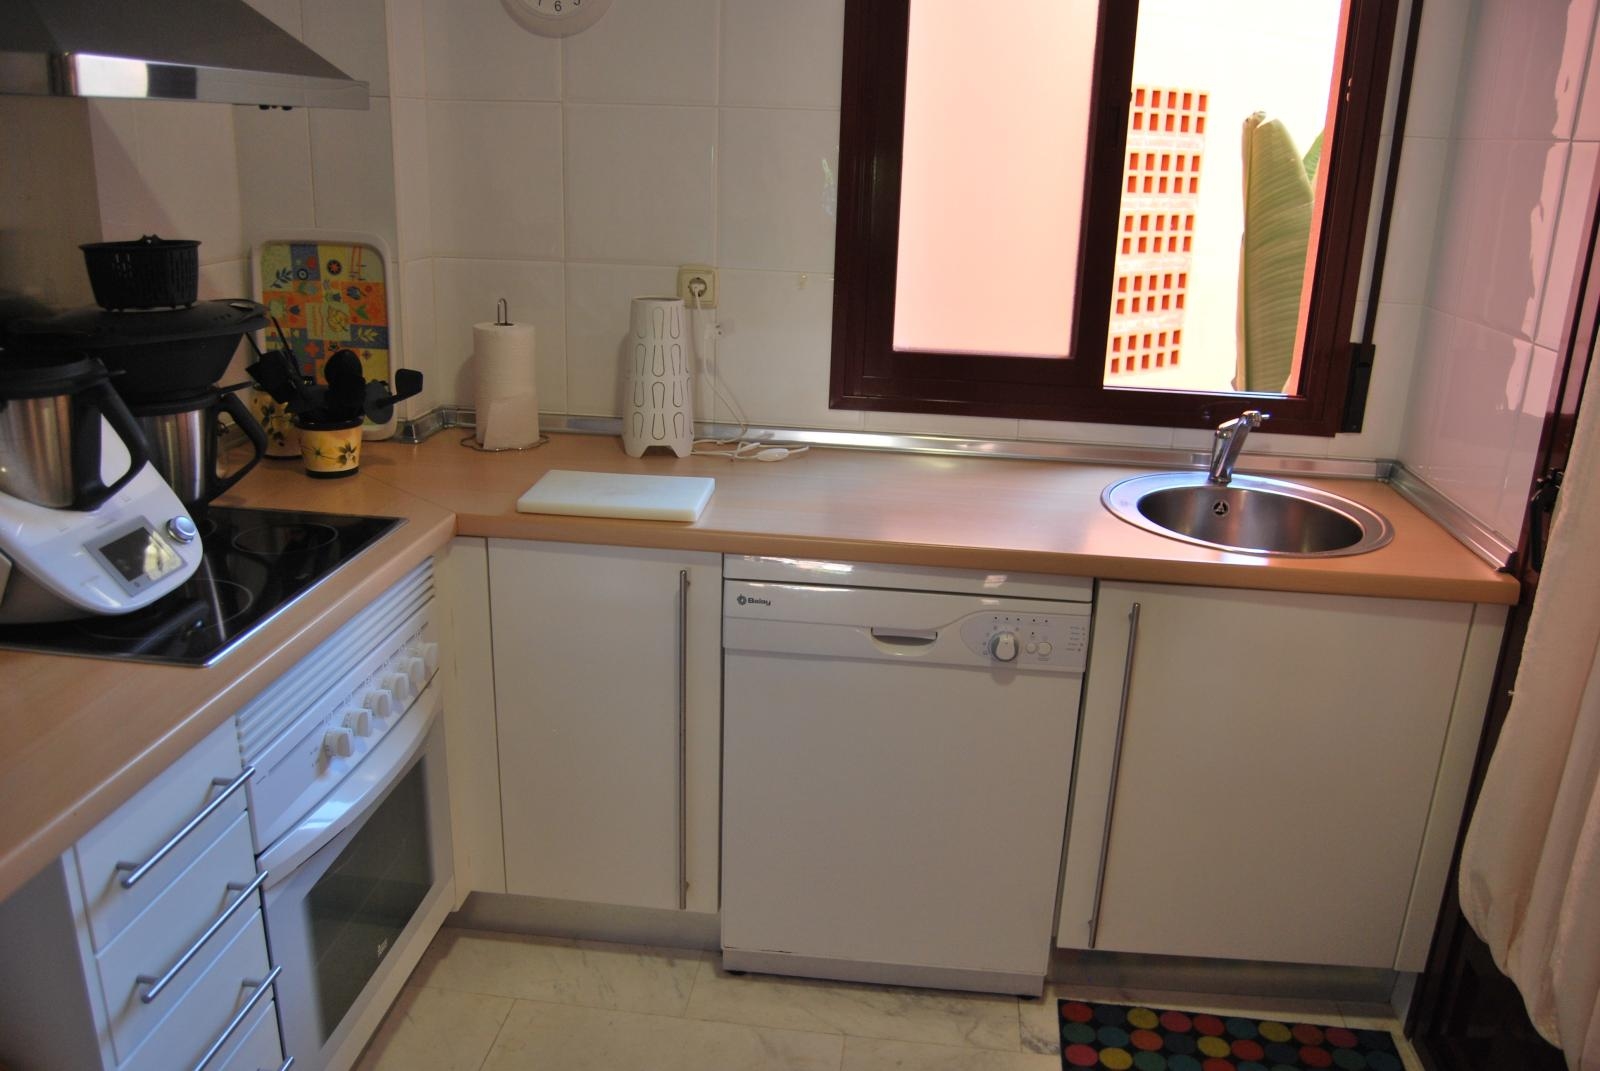 Apartment for rent in Motril